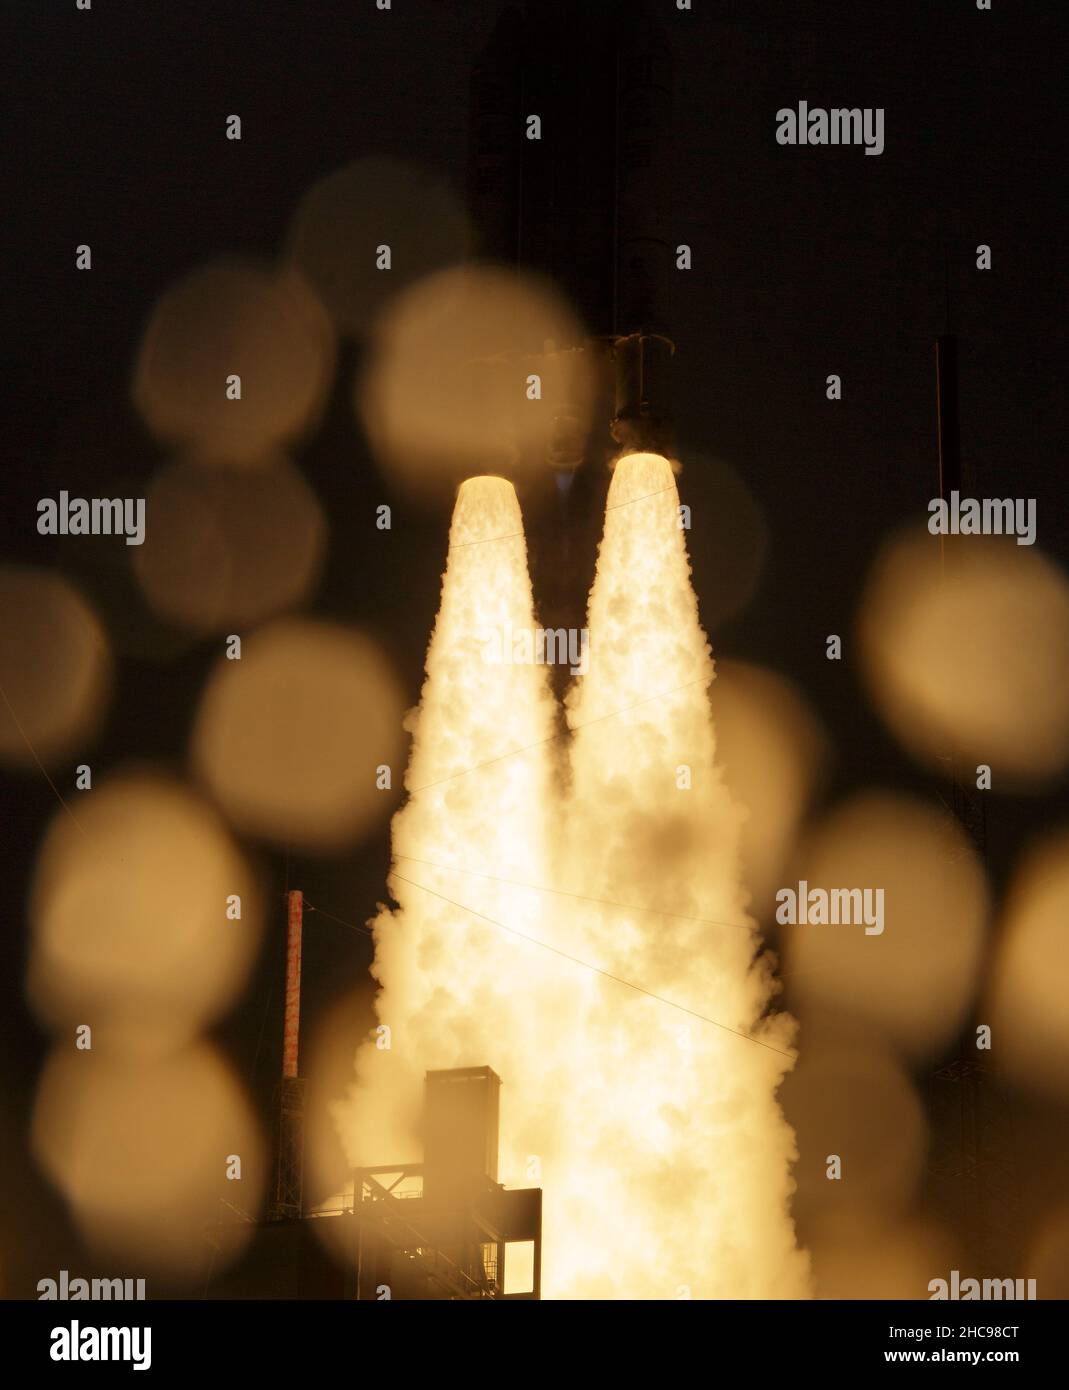 KOURO, FRENCH GUIANA - 25 December 2021 - The James Webb Space Telescope launches onboard an Ariane 5 rocket from the ELA-3 Launch Zone of Europe’s Sp Stock Photo